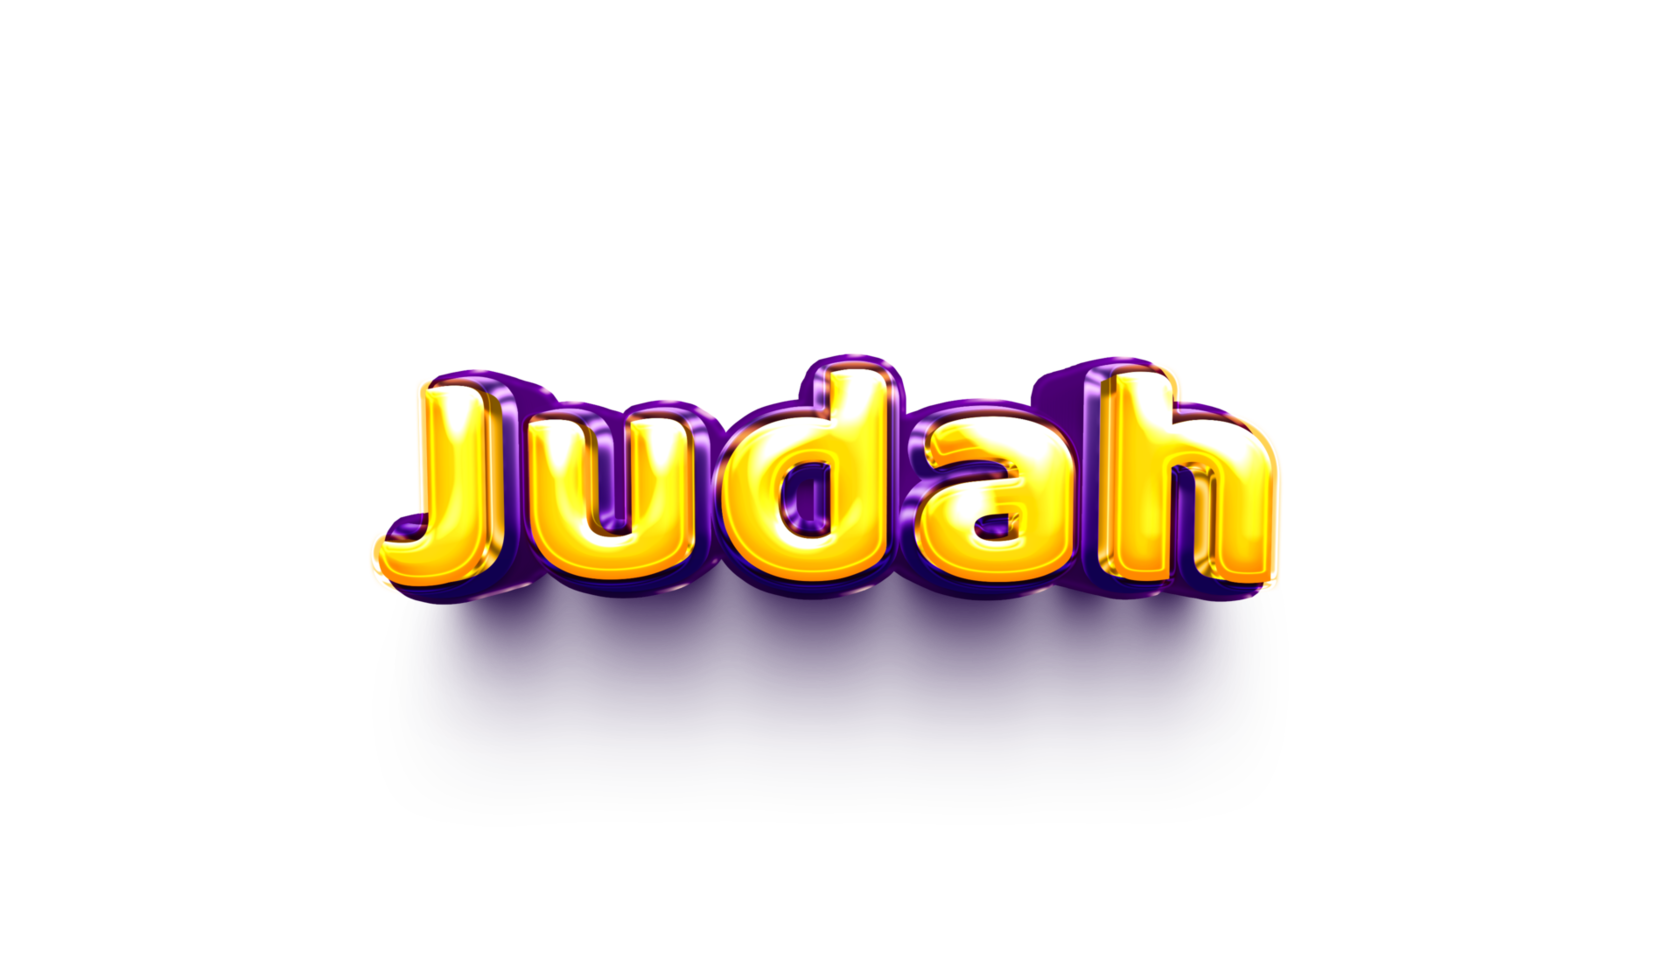 names of boys English helium balloon shiny celebration sticker 3d inflated Judah png